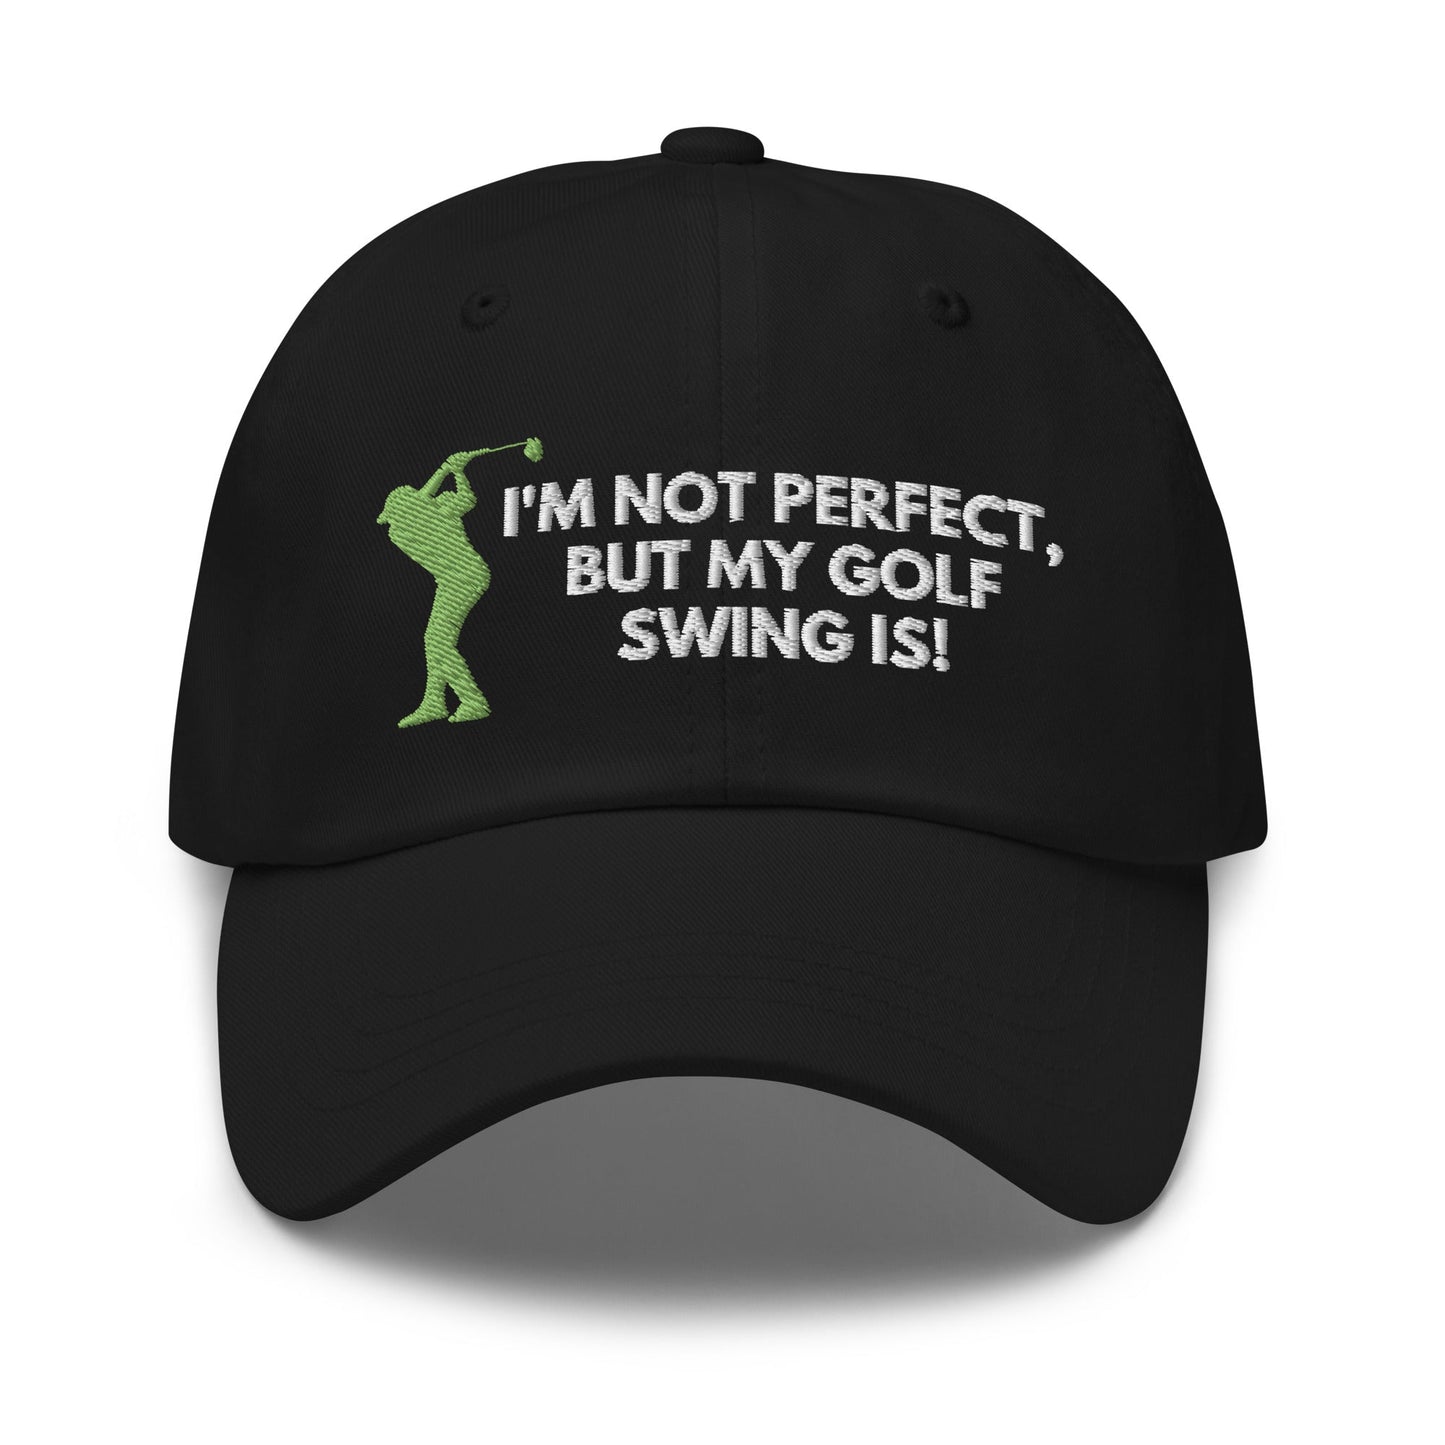 Funny Golfer Gifts  Dad Cap Black I'm Not Perfect But My Golf Swing Is Hat Cap